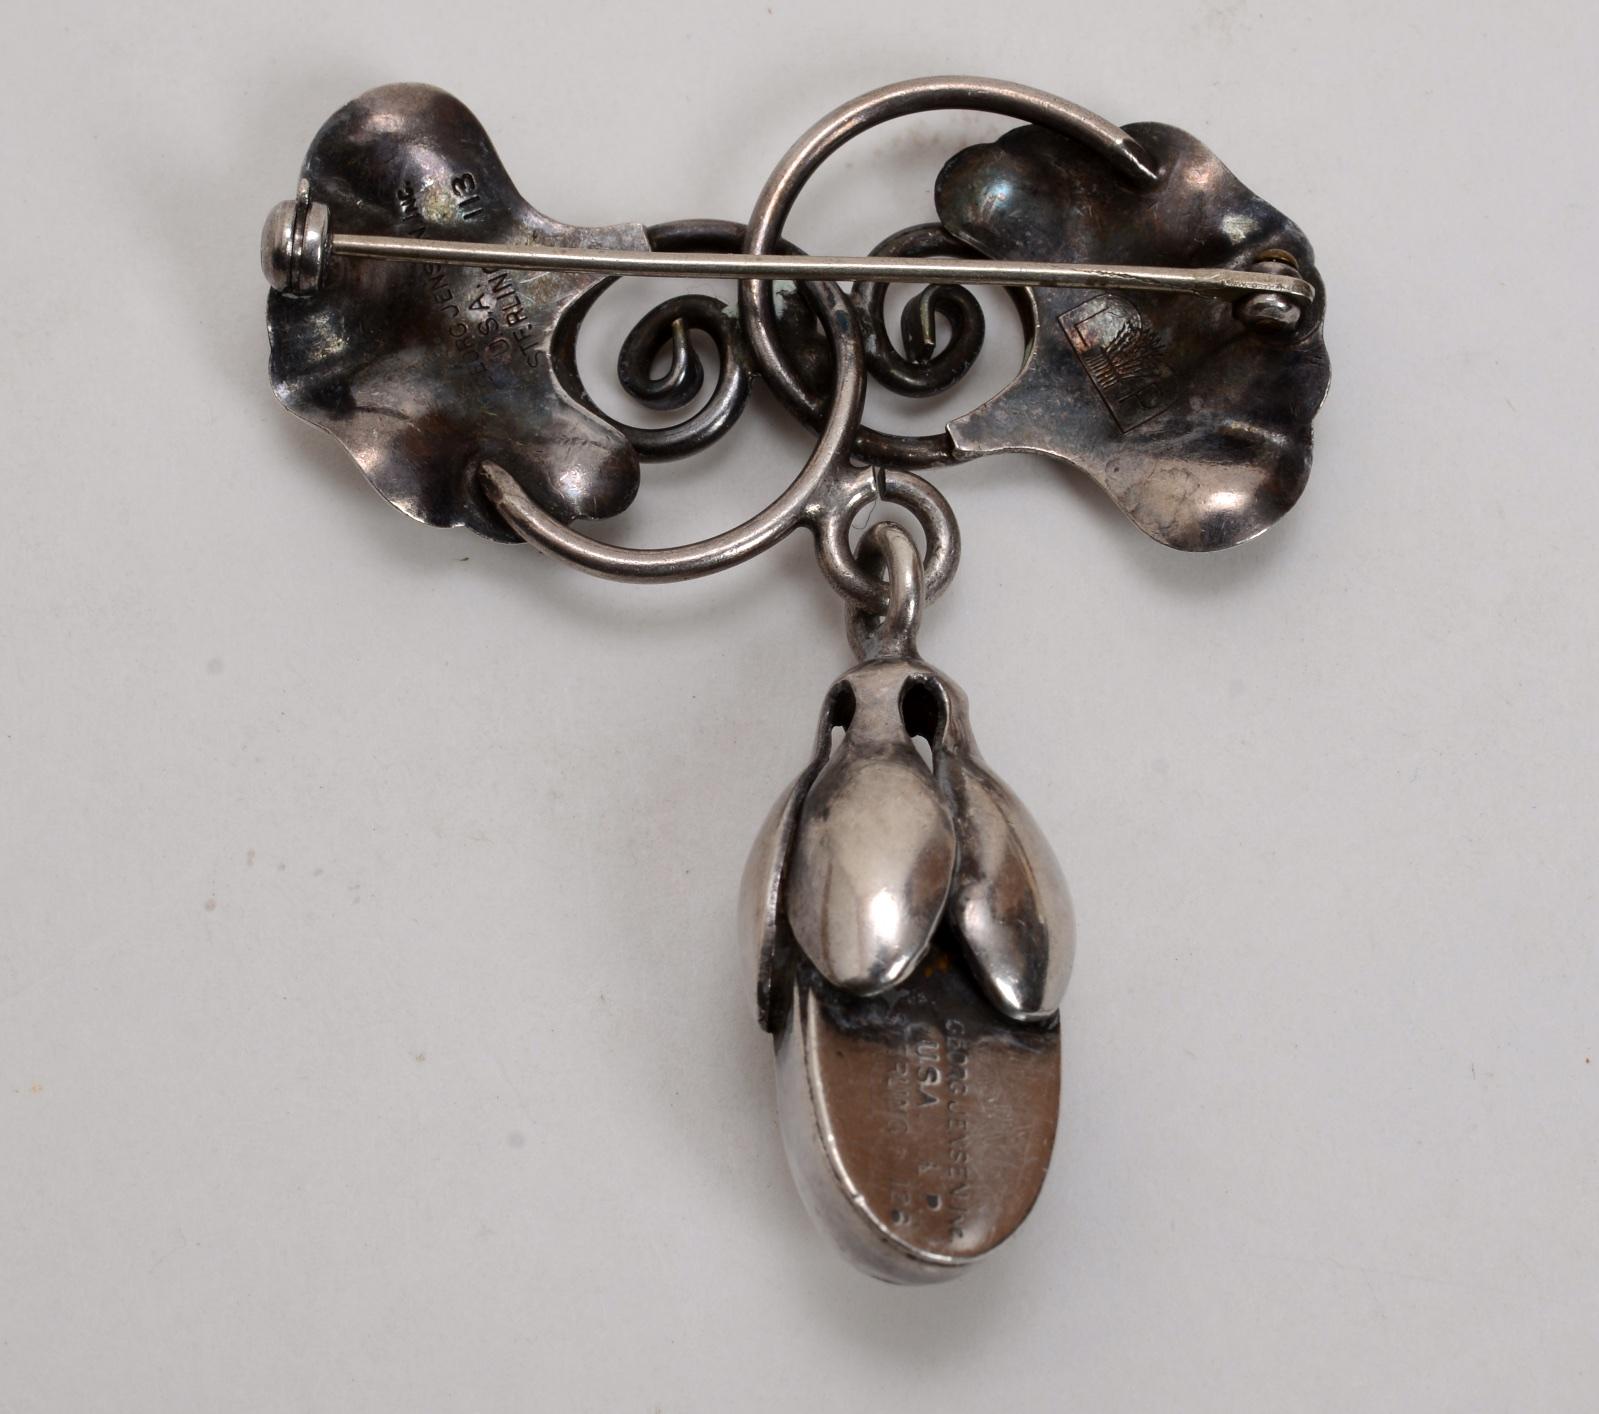 Georg Jensen USA Sterling Silver La Paglia Foliate Brooch with Pendant Blossom Drop, c1940. Numbered 113 on pin and 126 on blossom. Designer Alphonse La Paglia was of Sicilian descent. He worked at Georg Jensen in Denmark and emigrated to the US in